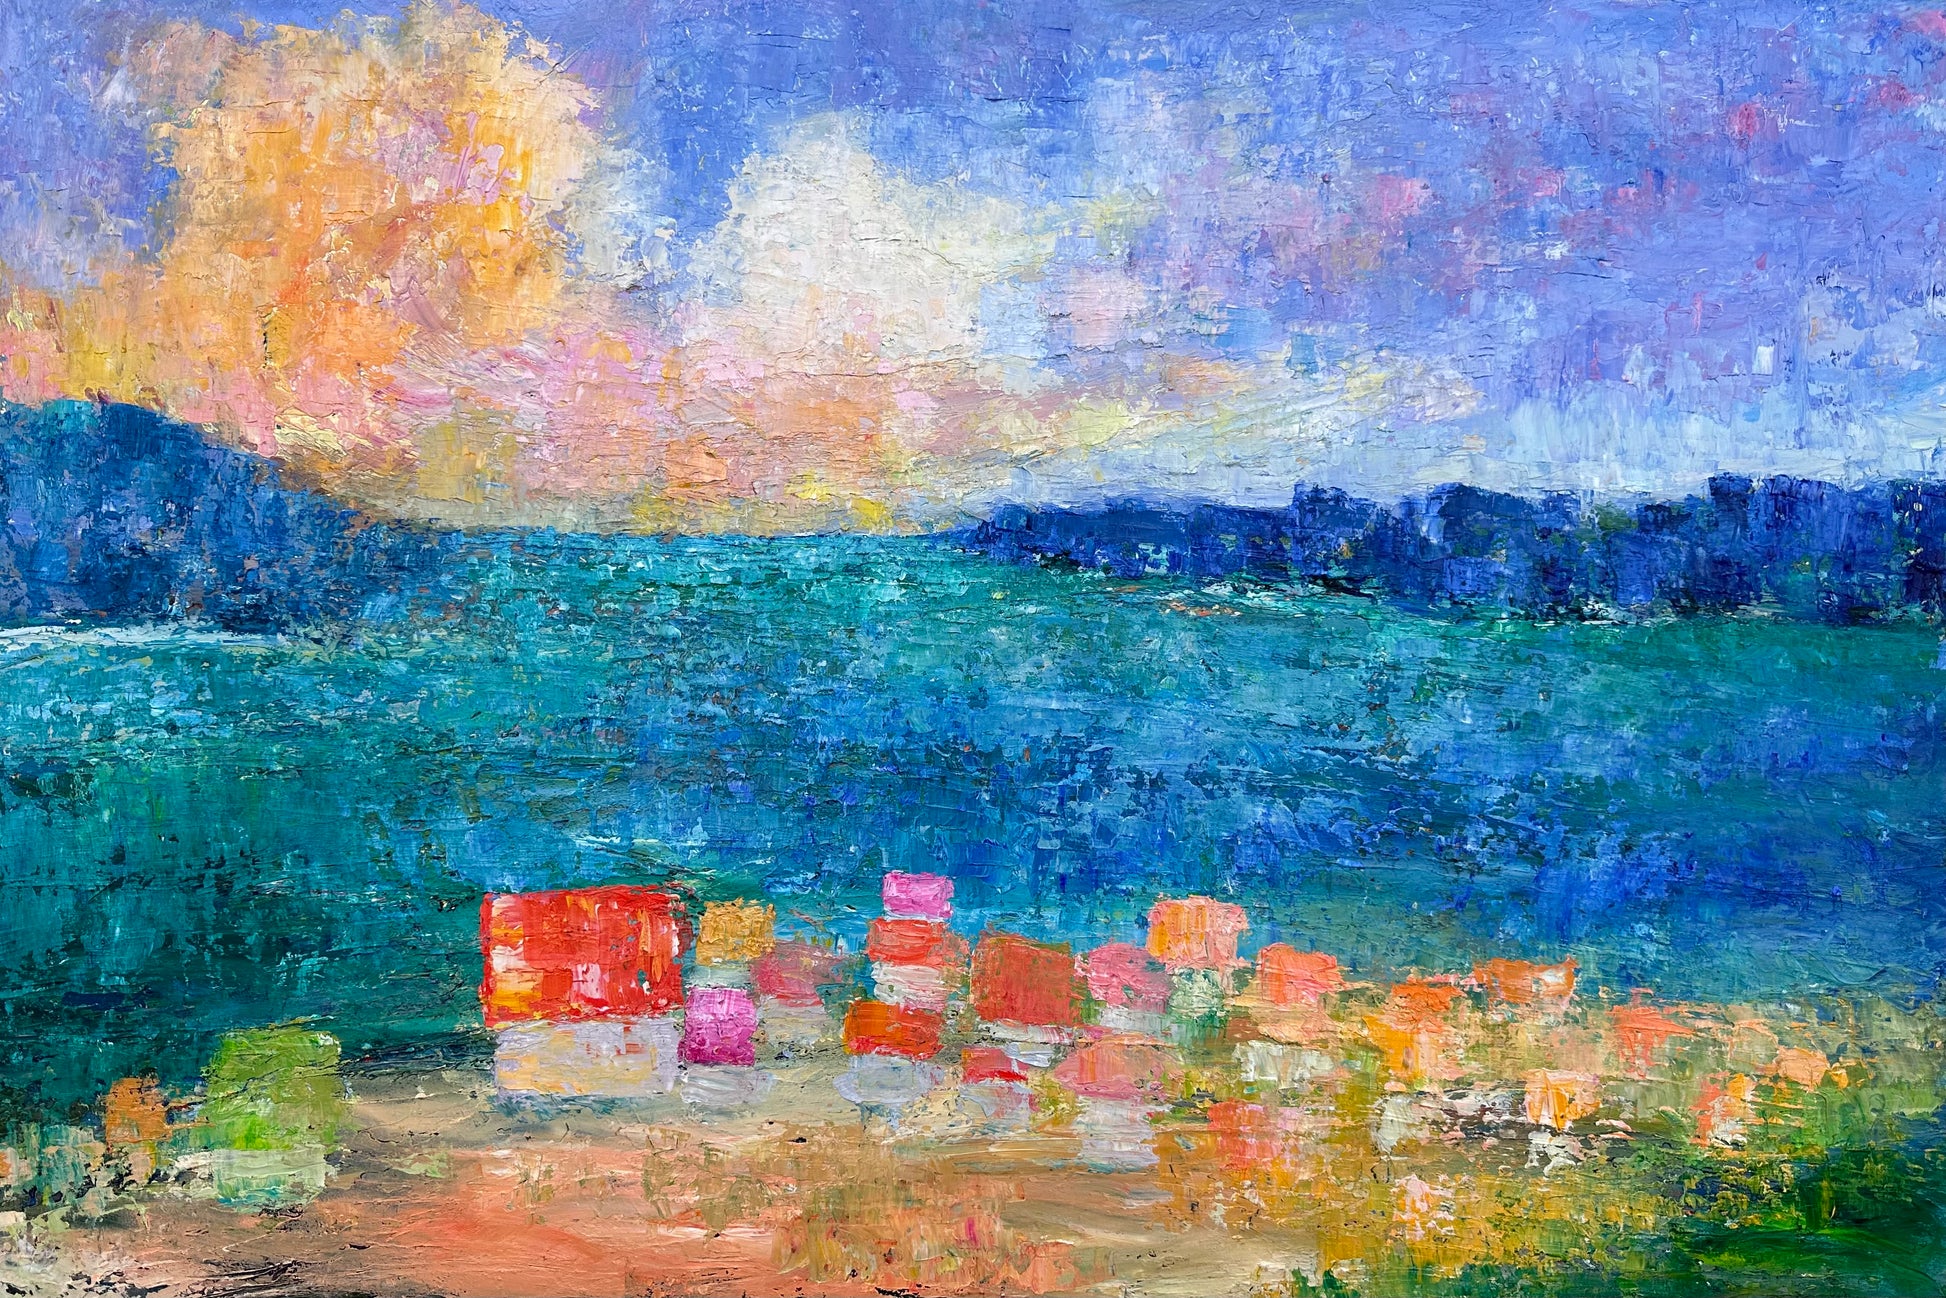 Abstract impressionist precubist oil painting of a beach scene with a dramatic sky and small roof village.